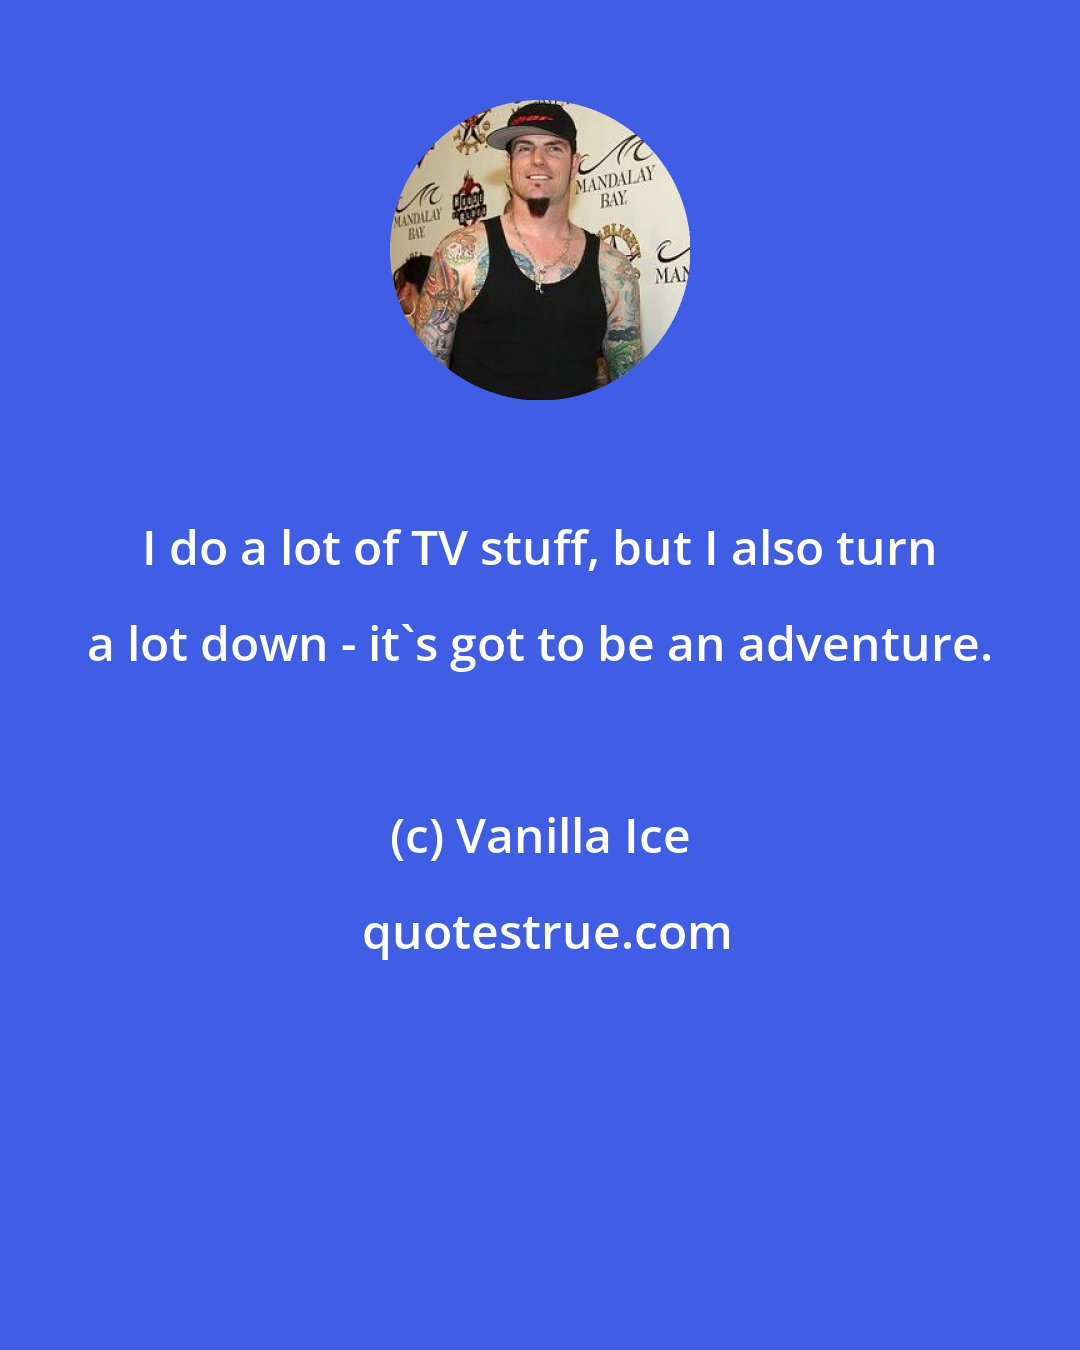 Vanilla Ice: I do a lot of TV stuff, but I also turn a lot down - it's got to be an adventure.